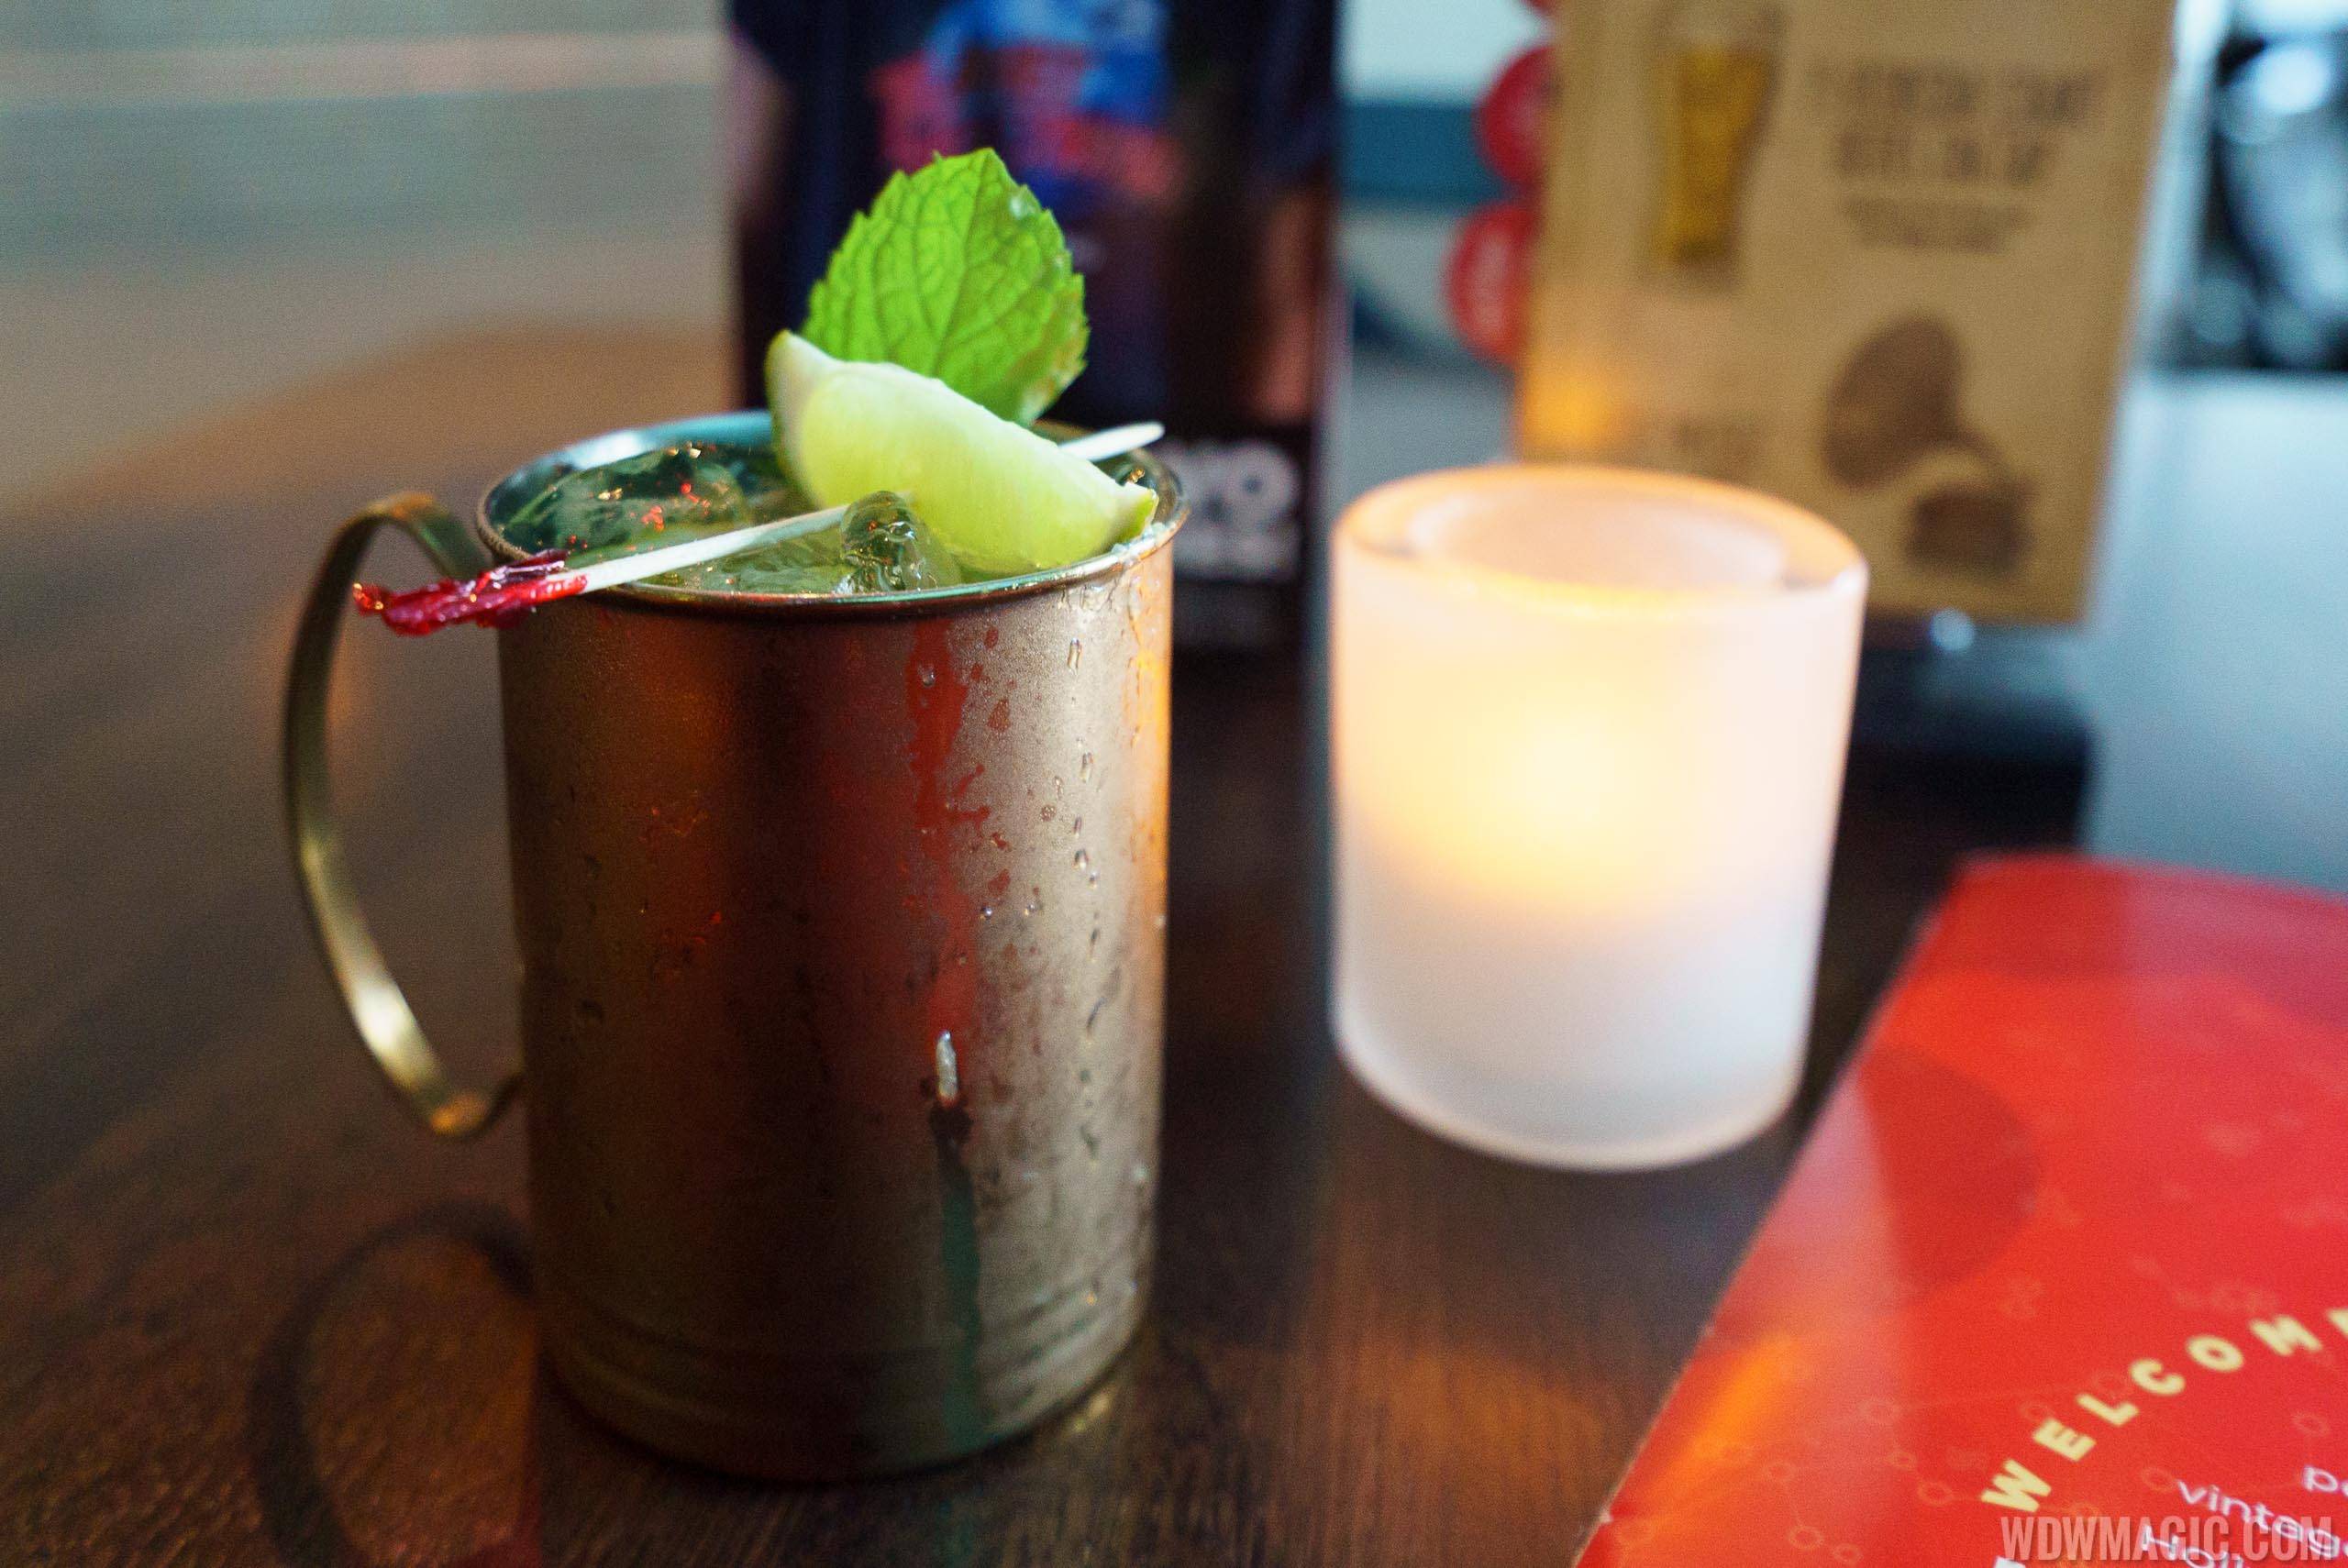 Mercury Mule- $12 New Amsterdam Vodka, Limoncino Bottega and Real ginger infused syrup